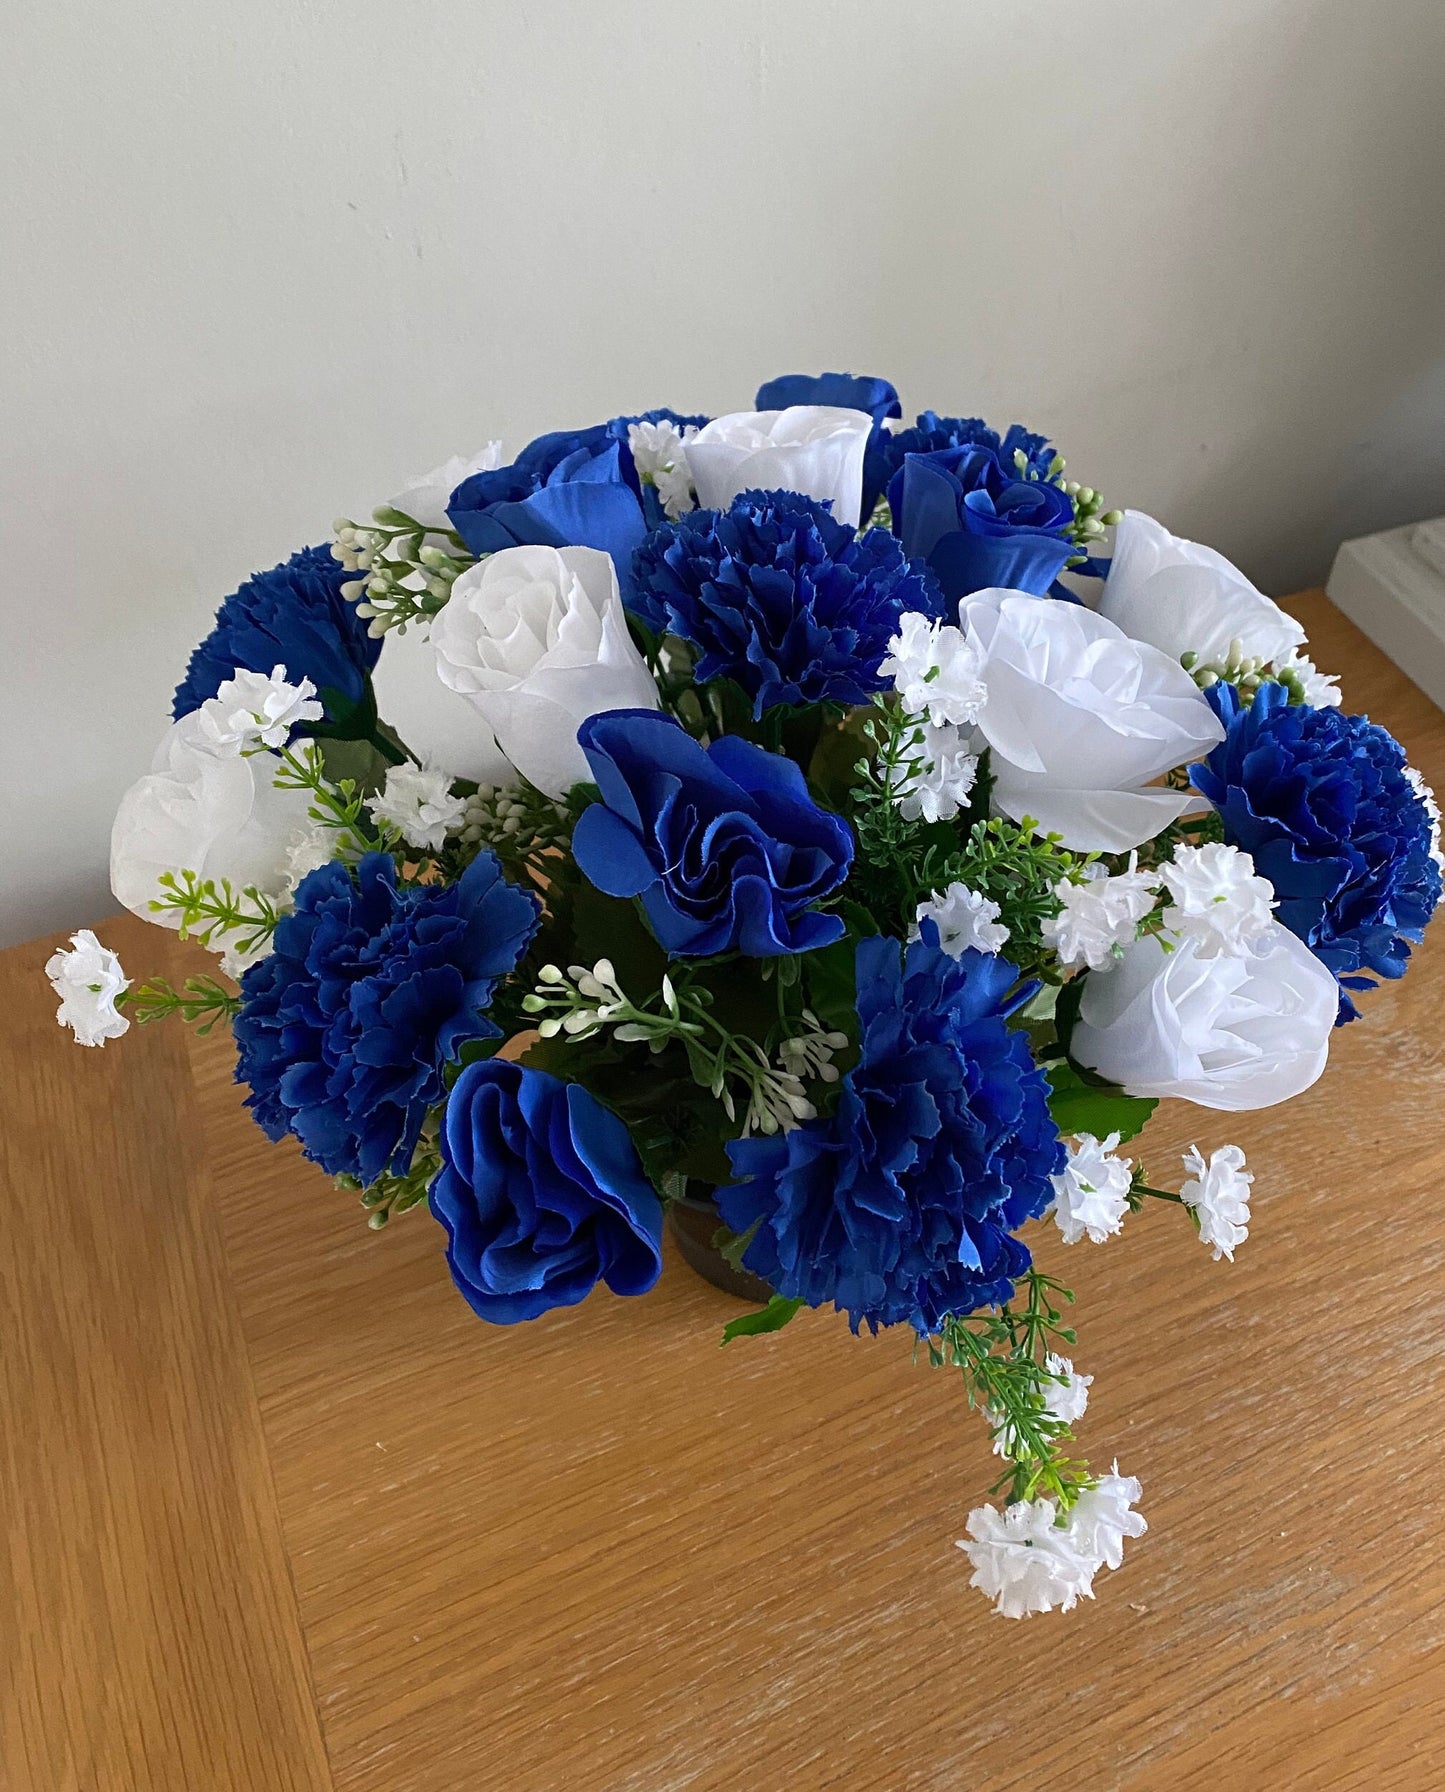 Artificial Flower Graveside Arrangement Blue and White Carnations, Roses and Babies Breath